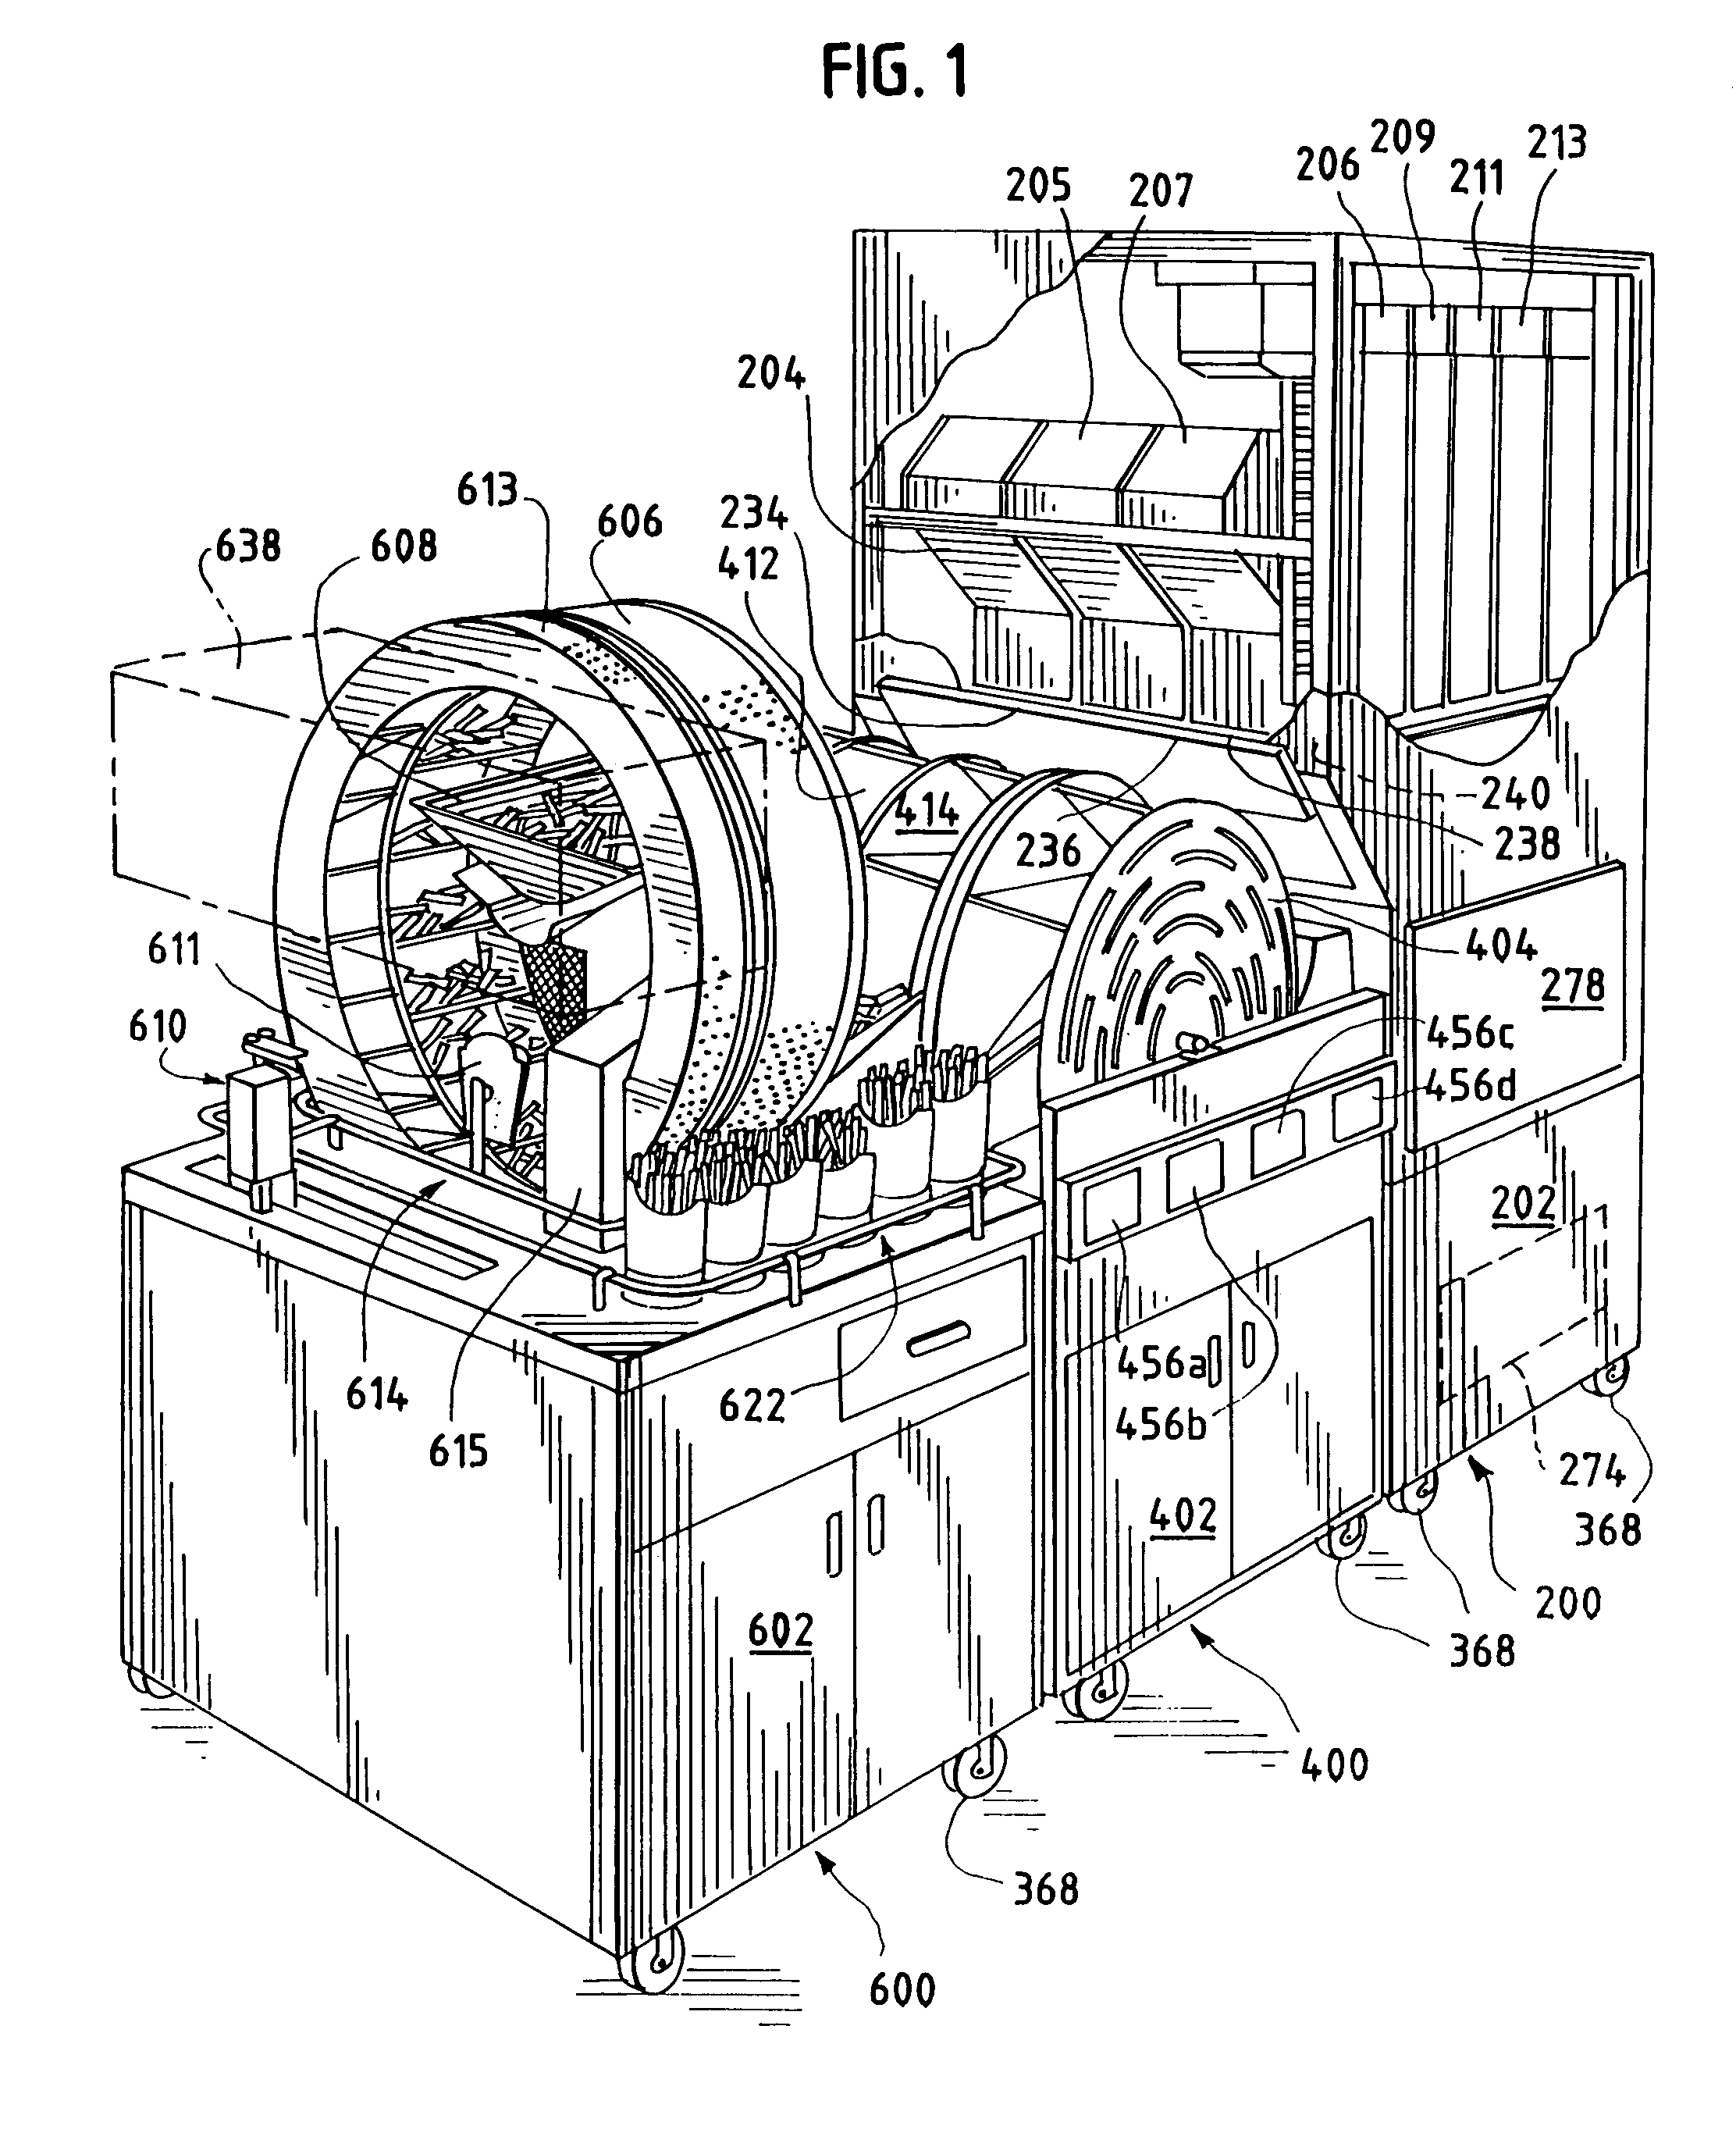 Automated food processing system and method